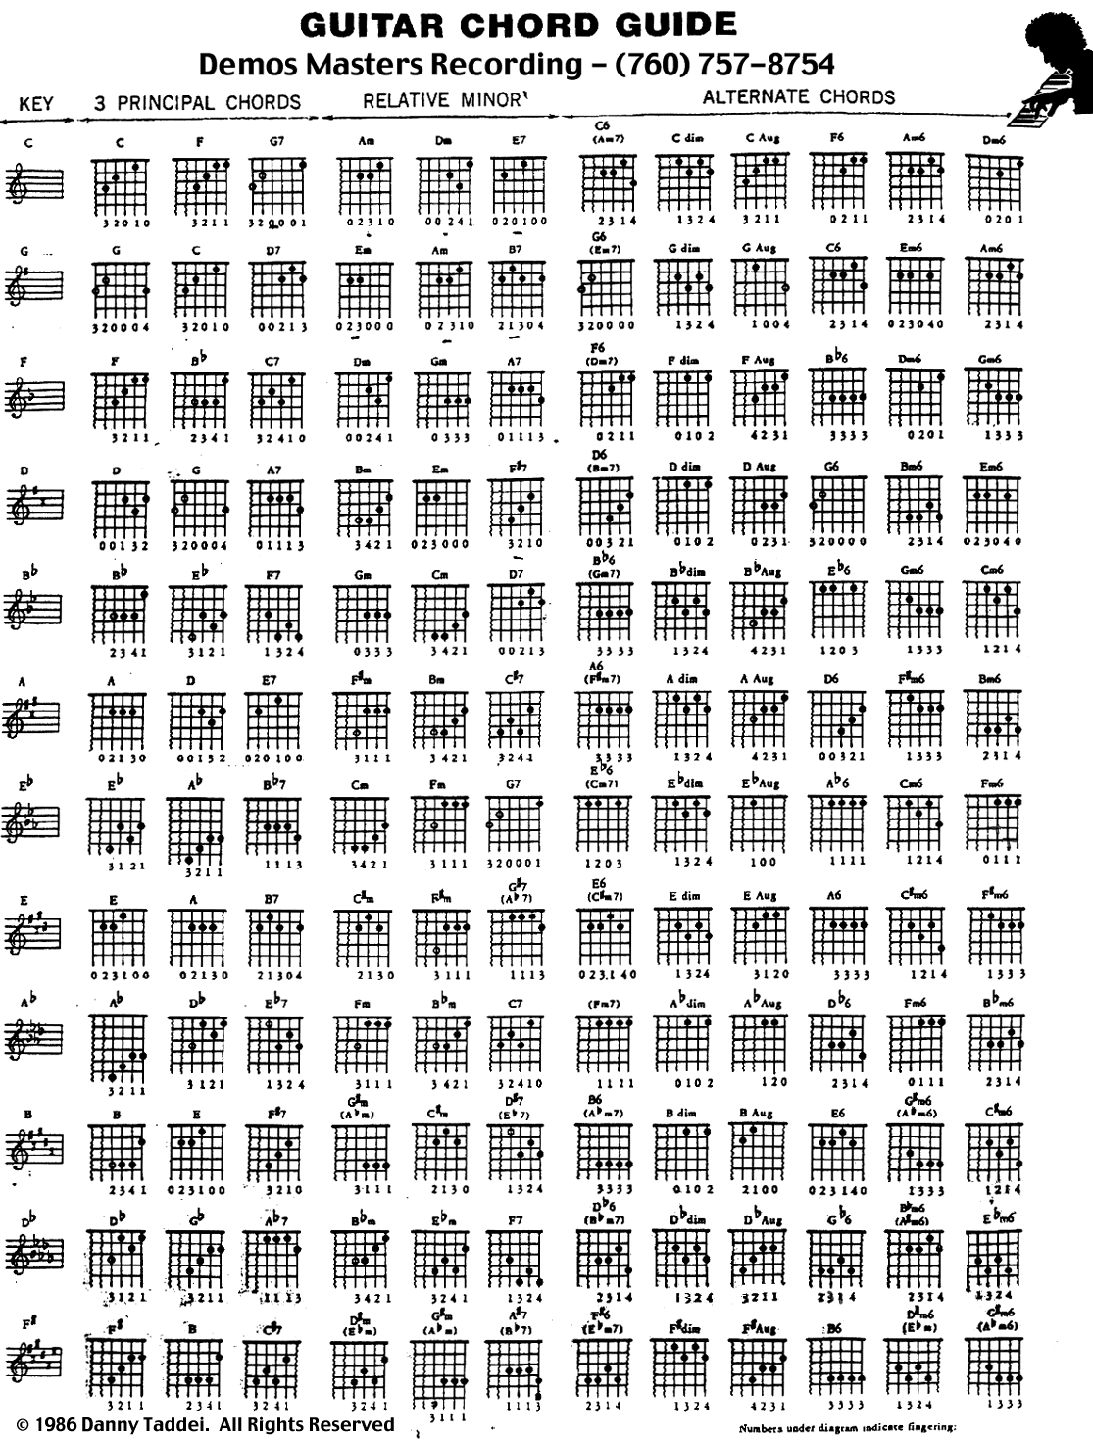 Complete acoustic guitar chords chart